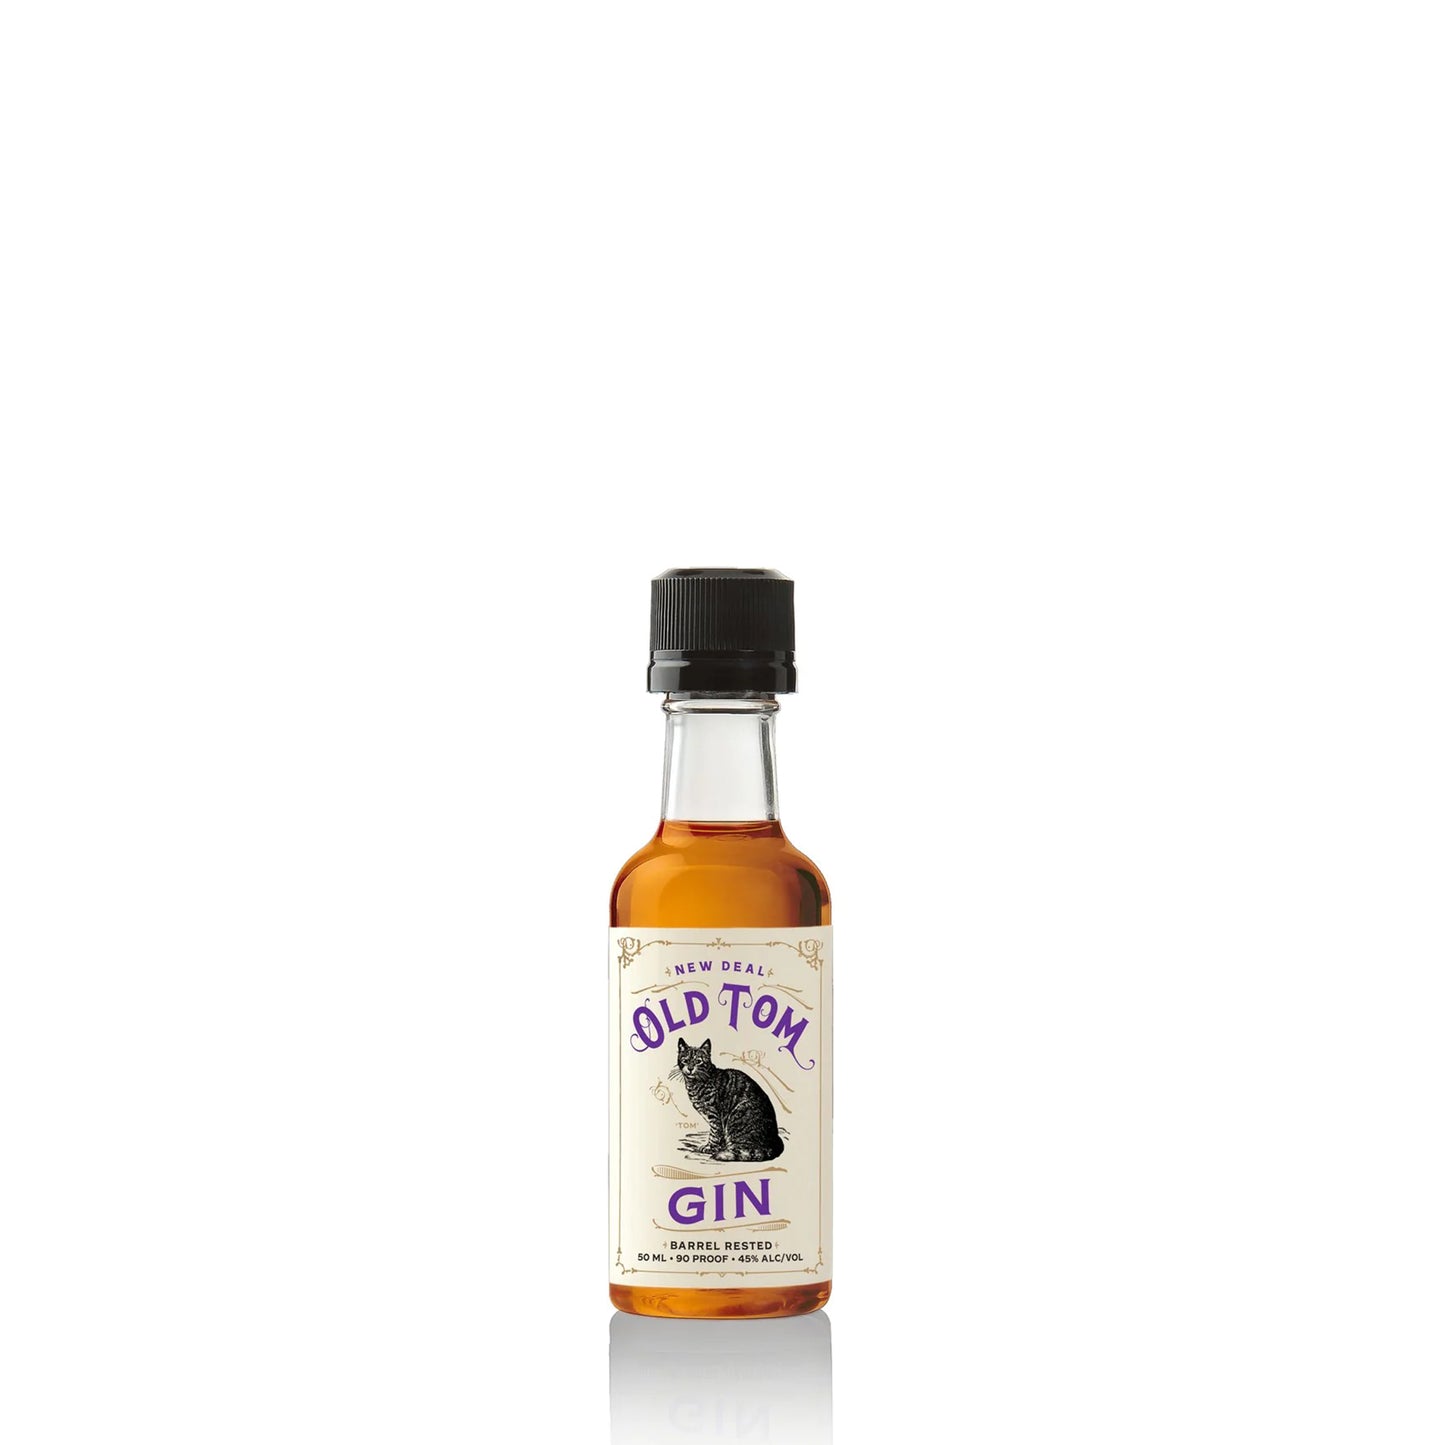 New Deal Old Tom Gin 50ml